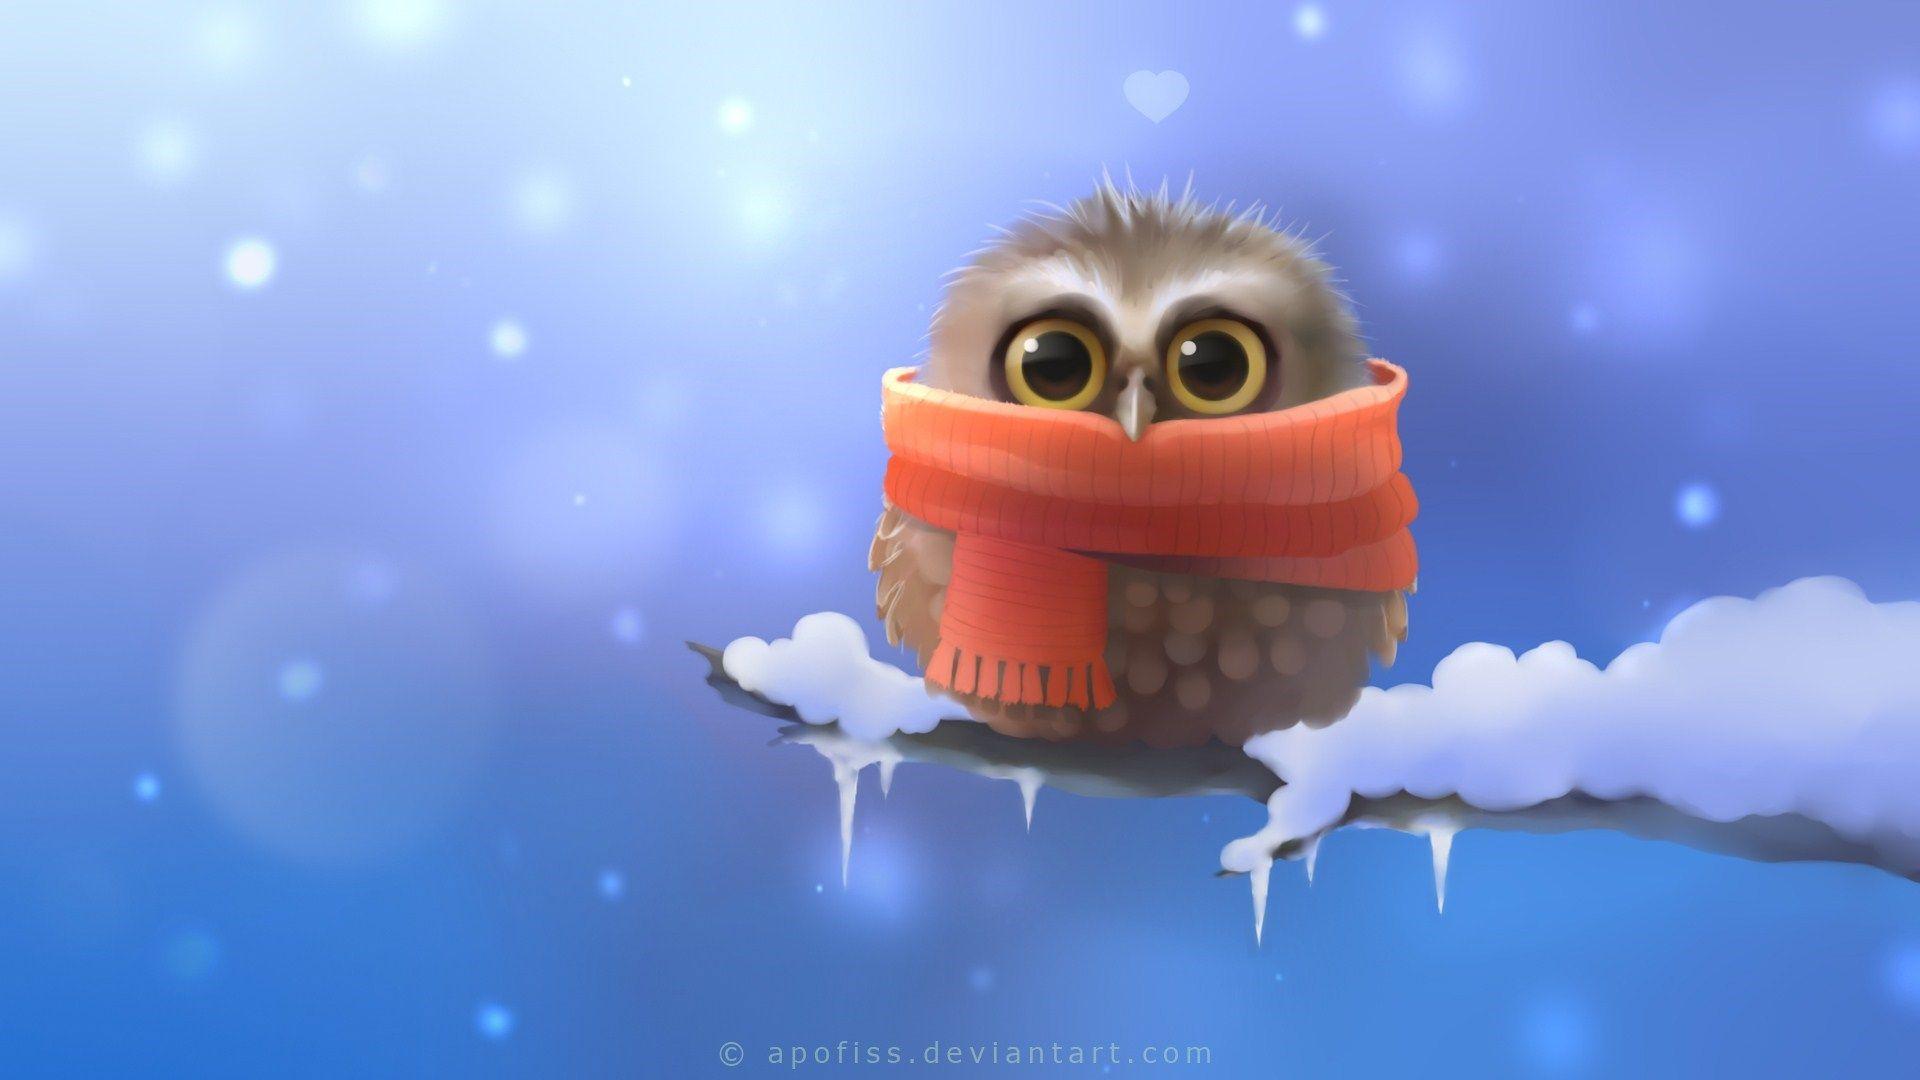 Funny Winter Wallpapers - Wallpaper Cave